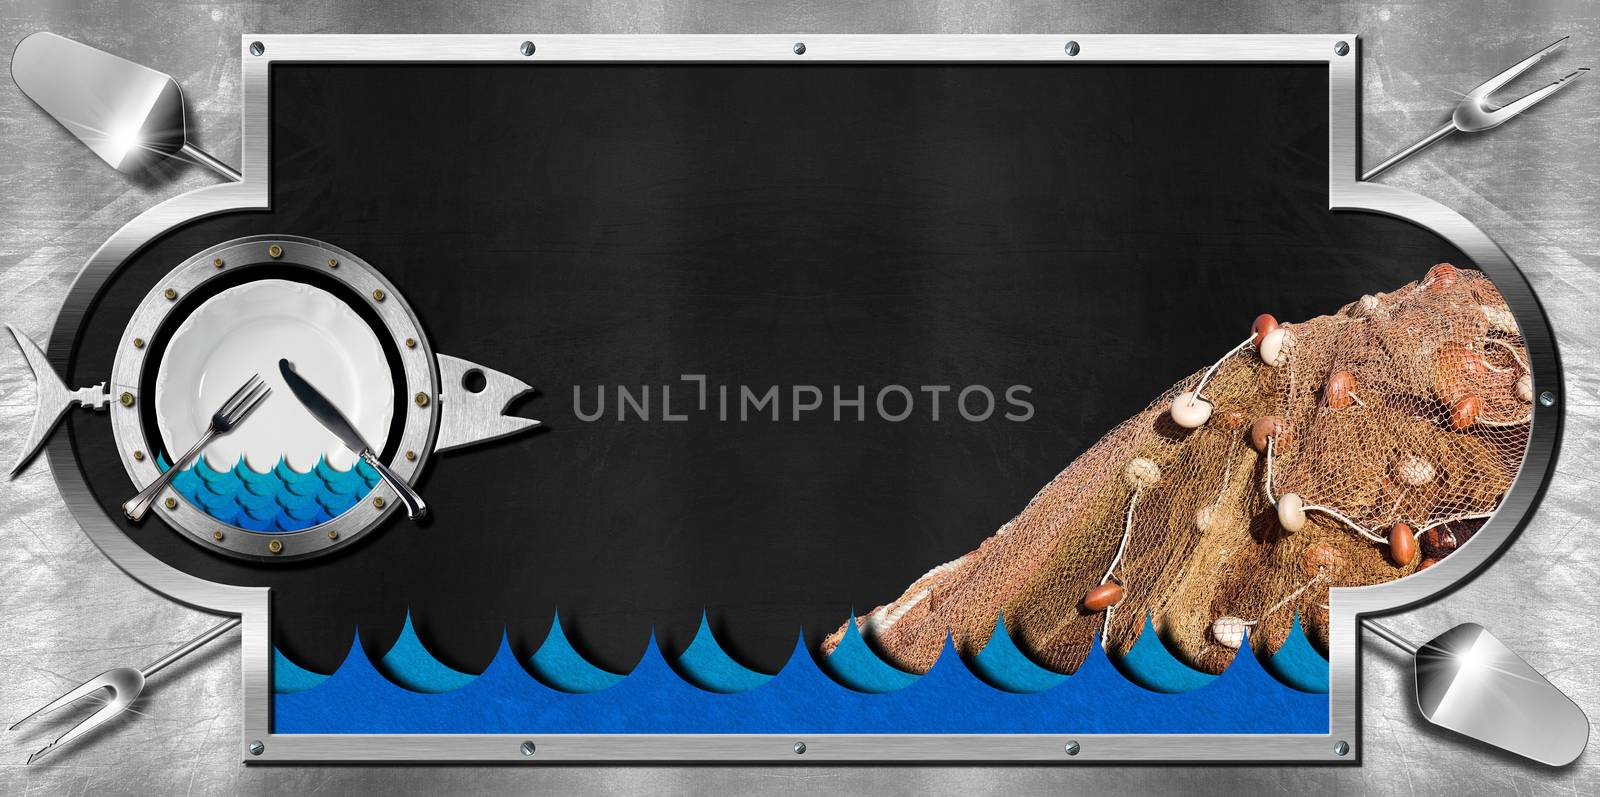 Horizontal empty blackboard on a metallic background with kitchen utensils, fishing net, plate and cutlery and metal fish. Template for recipes or seafood menu